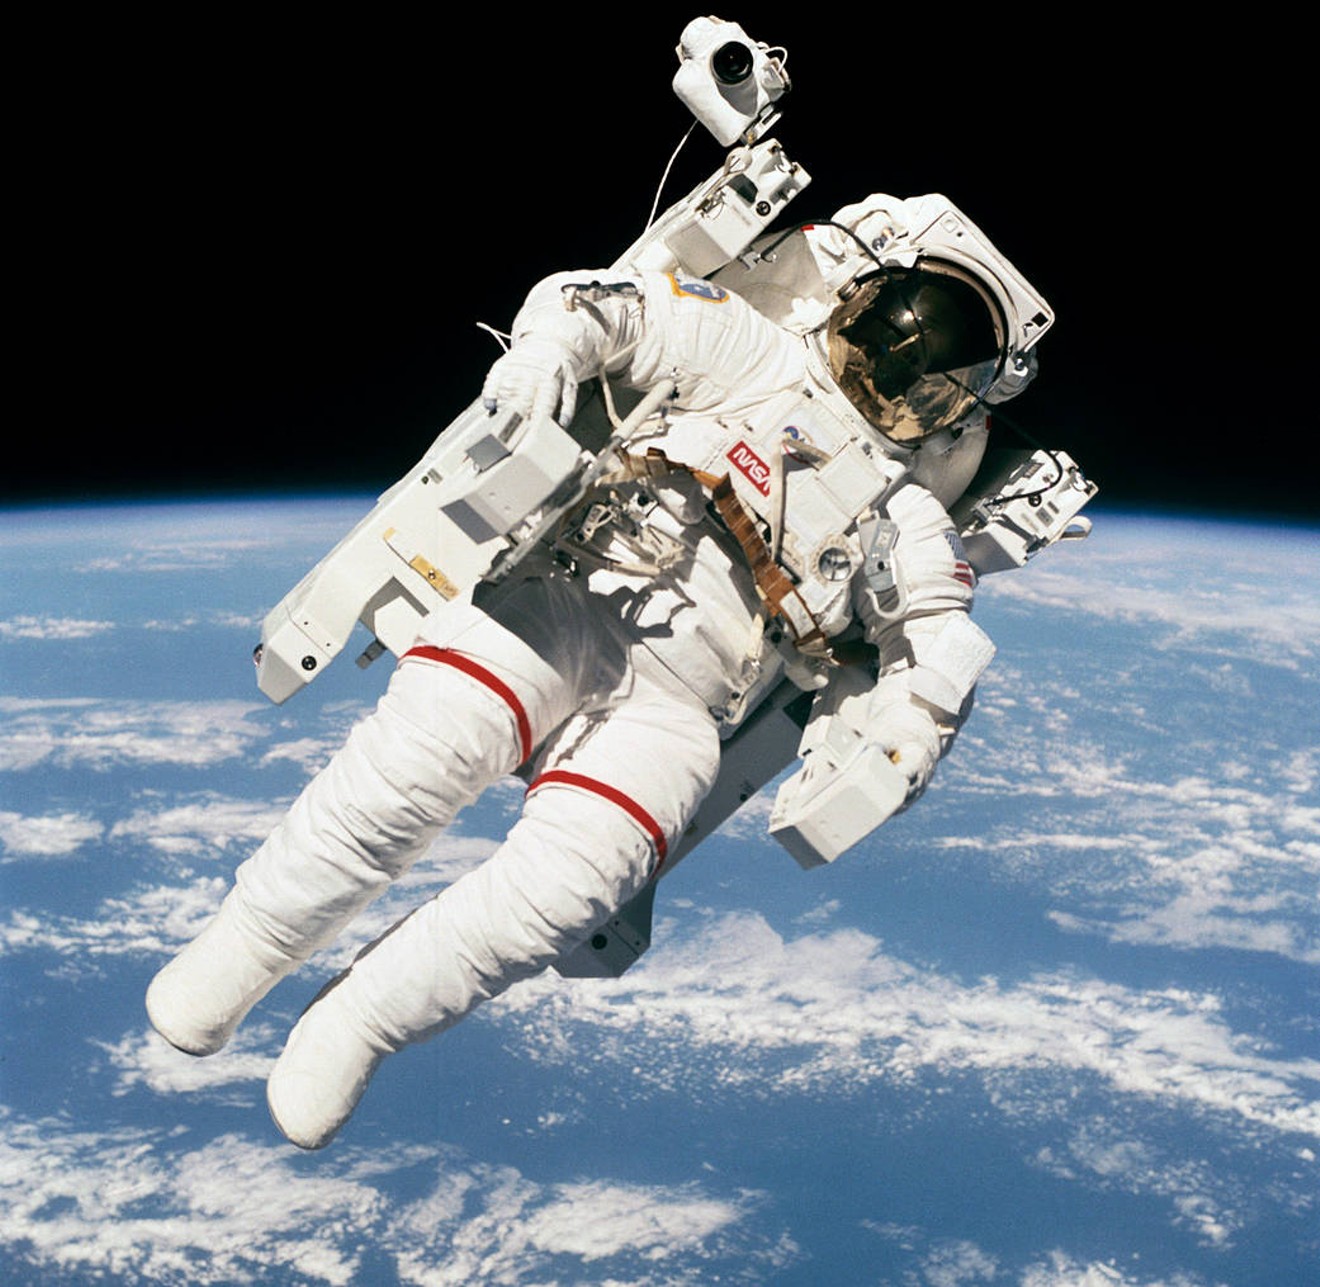 Bruce McCandless II on his amazing untethered space flight.